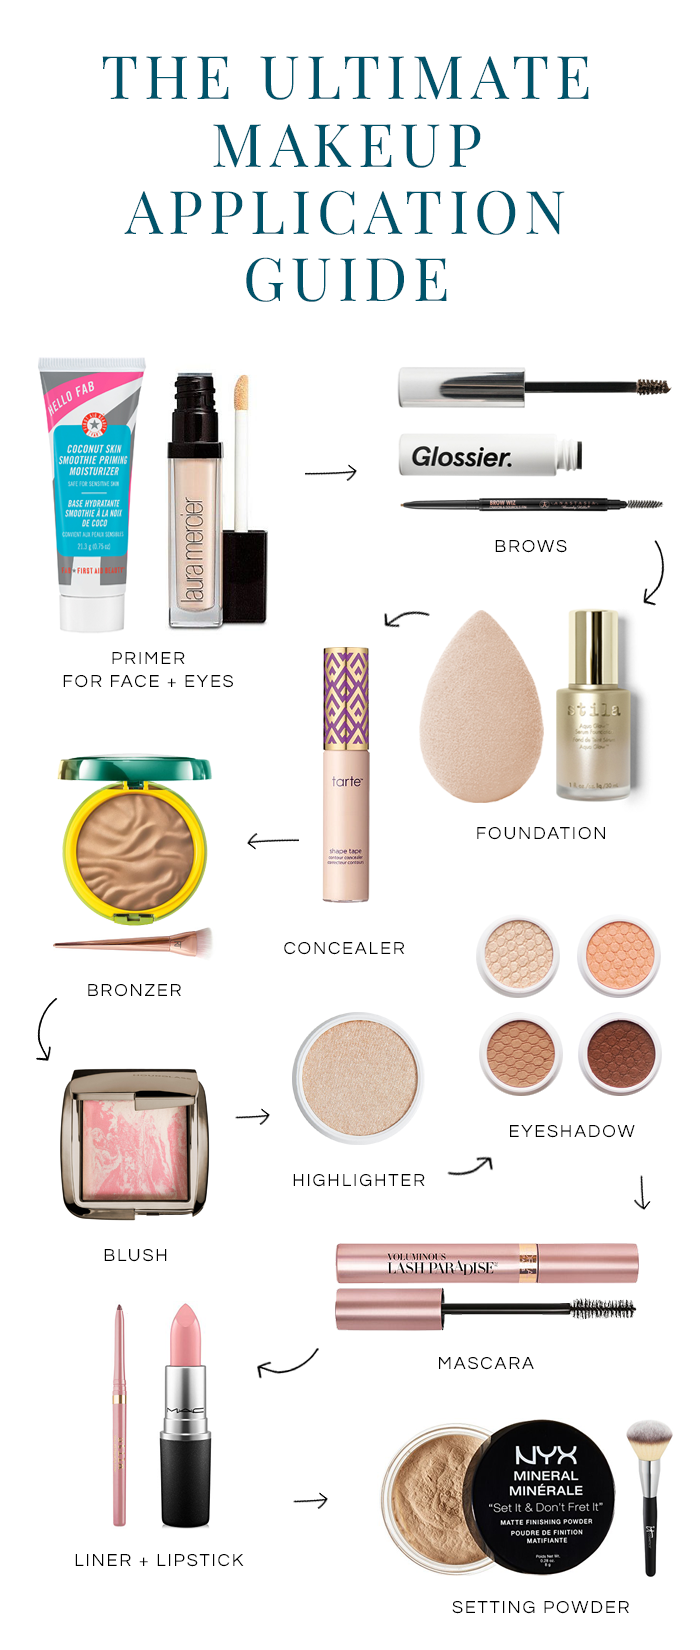 Order of Makeup Application featured by top DC beauty blogger, The Beauty Minimalist